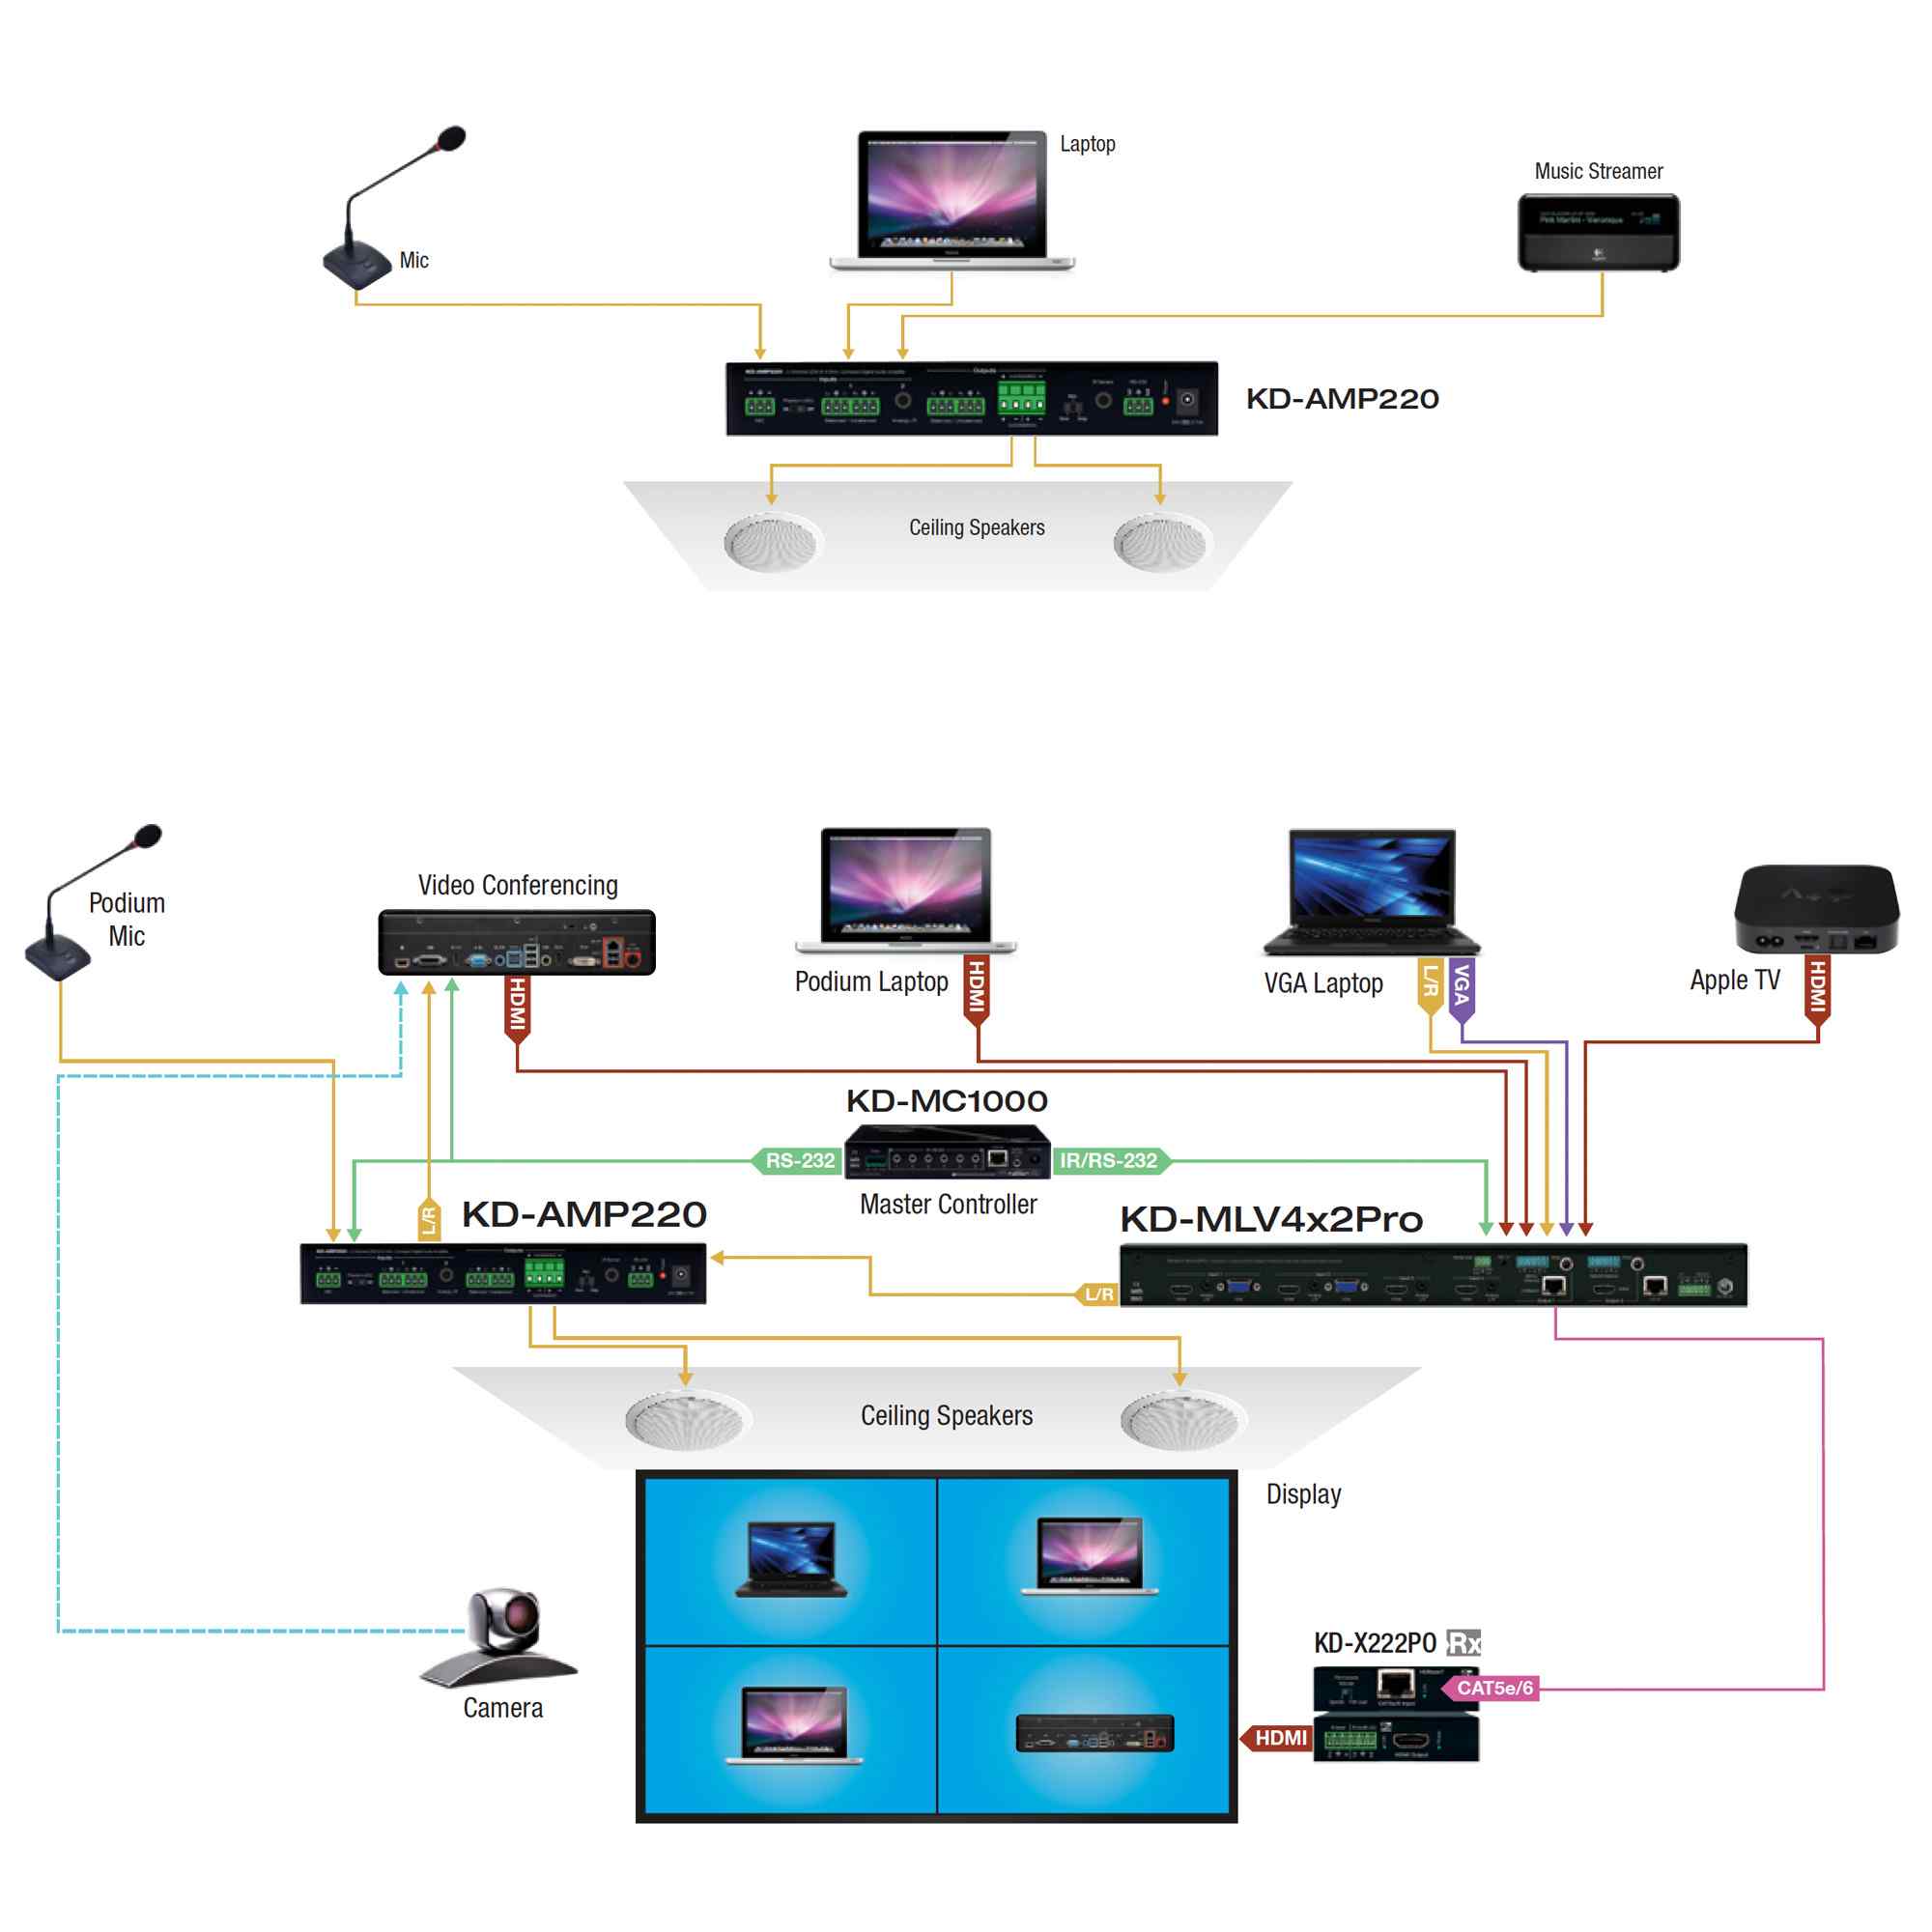 Thumbnail of Example Diagram showing multiple devices connected to the amps & pre amps